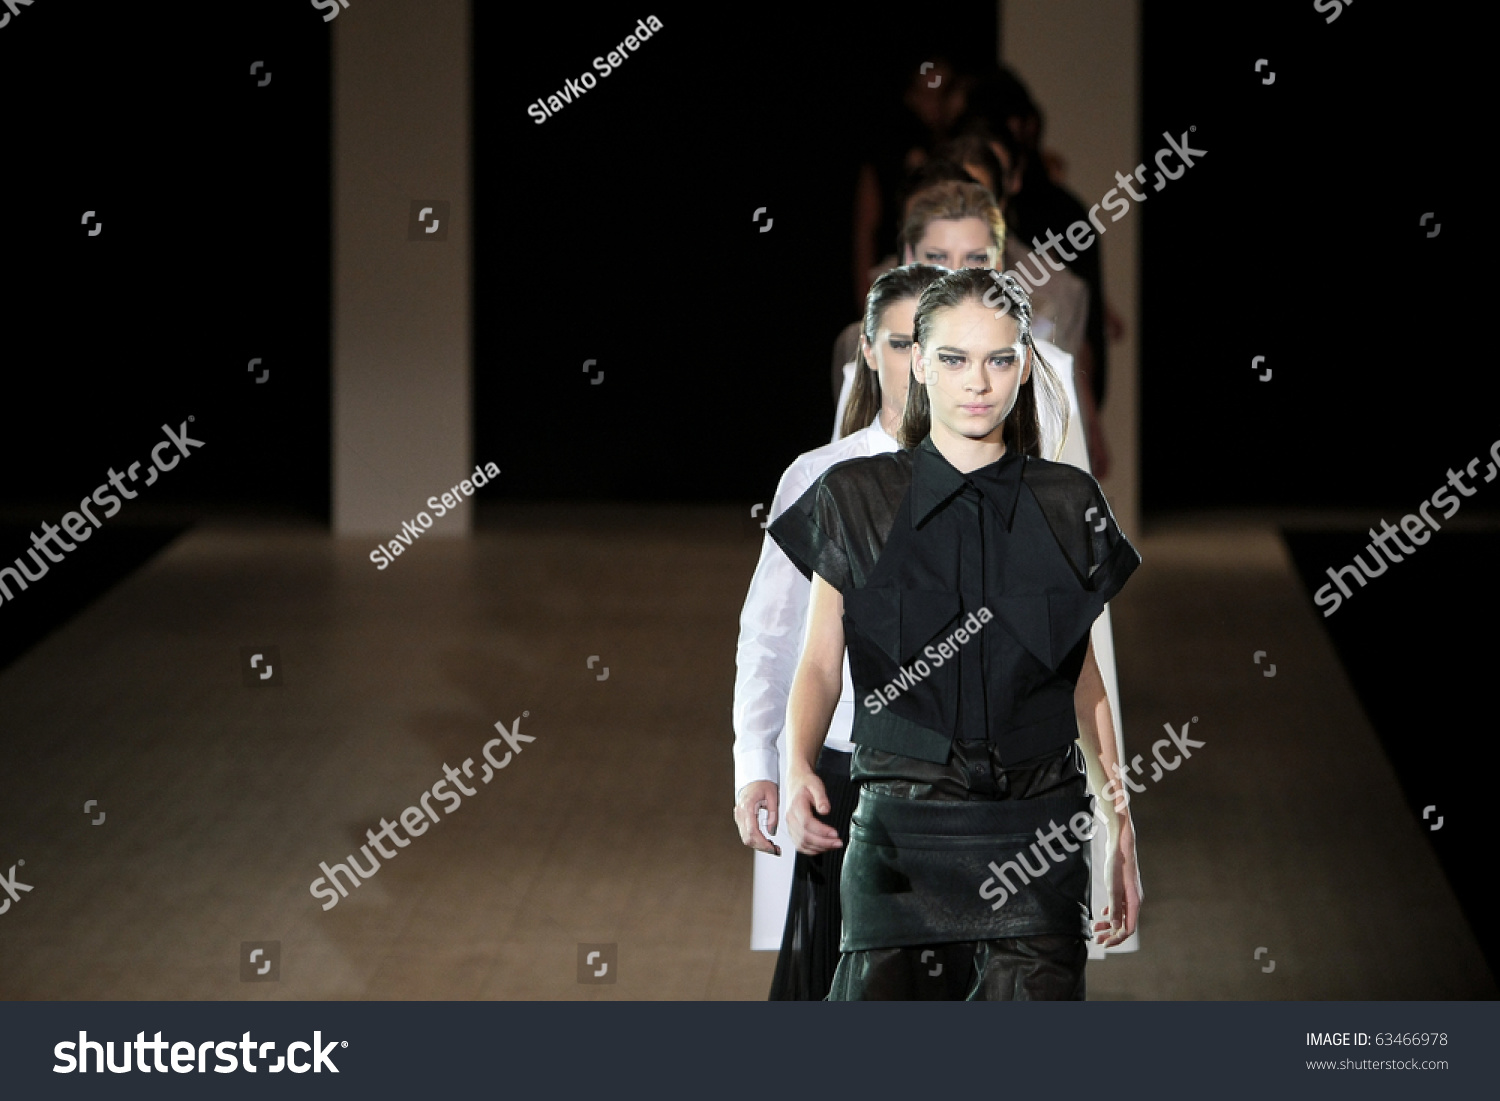 Kiev, Ukraine - Oct 16: Models Poses At The Runway During Fashion Show ...